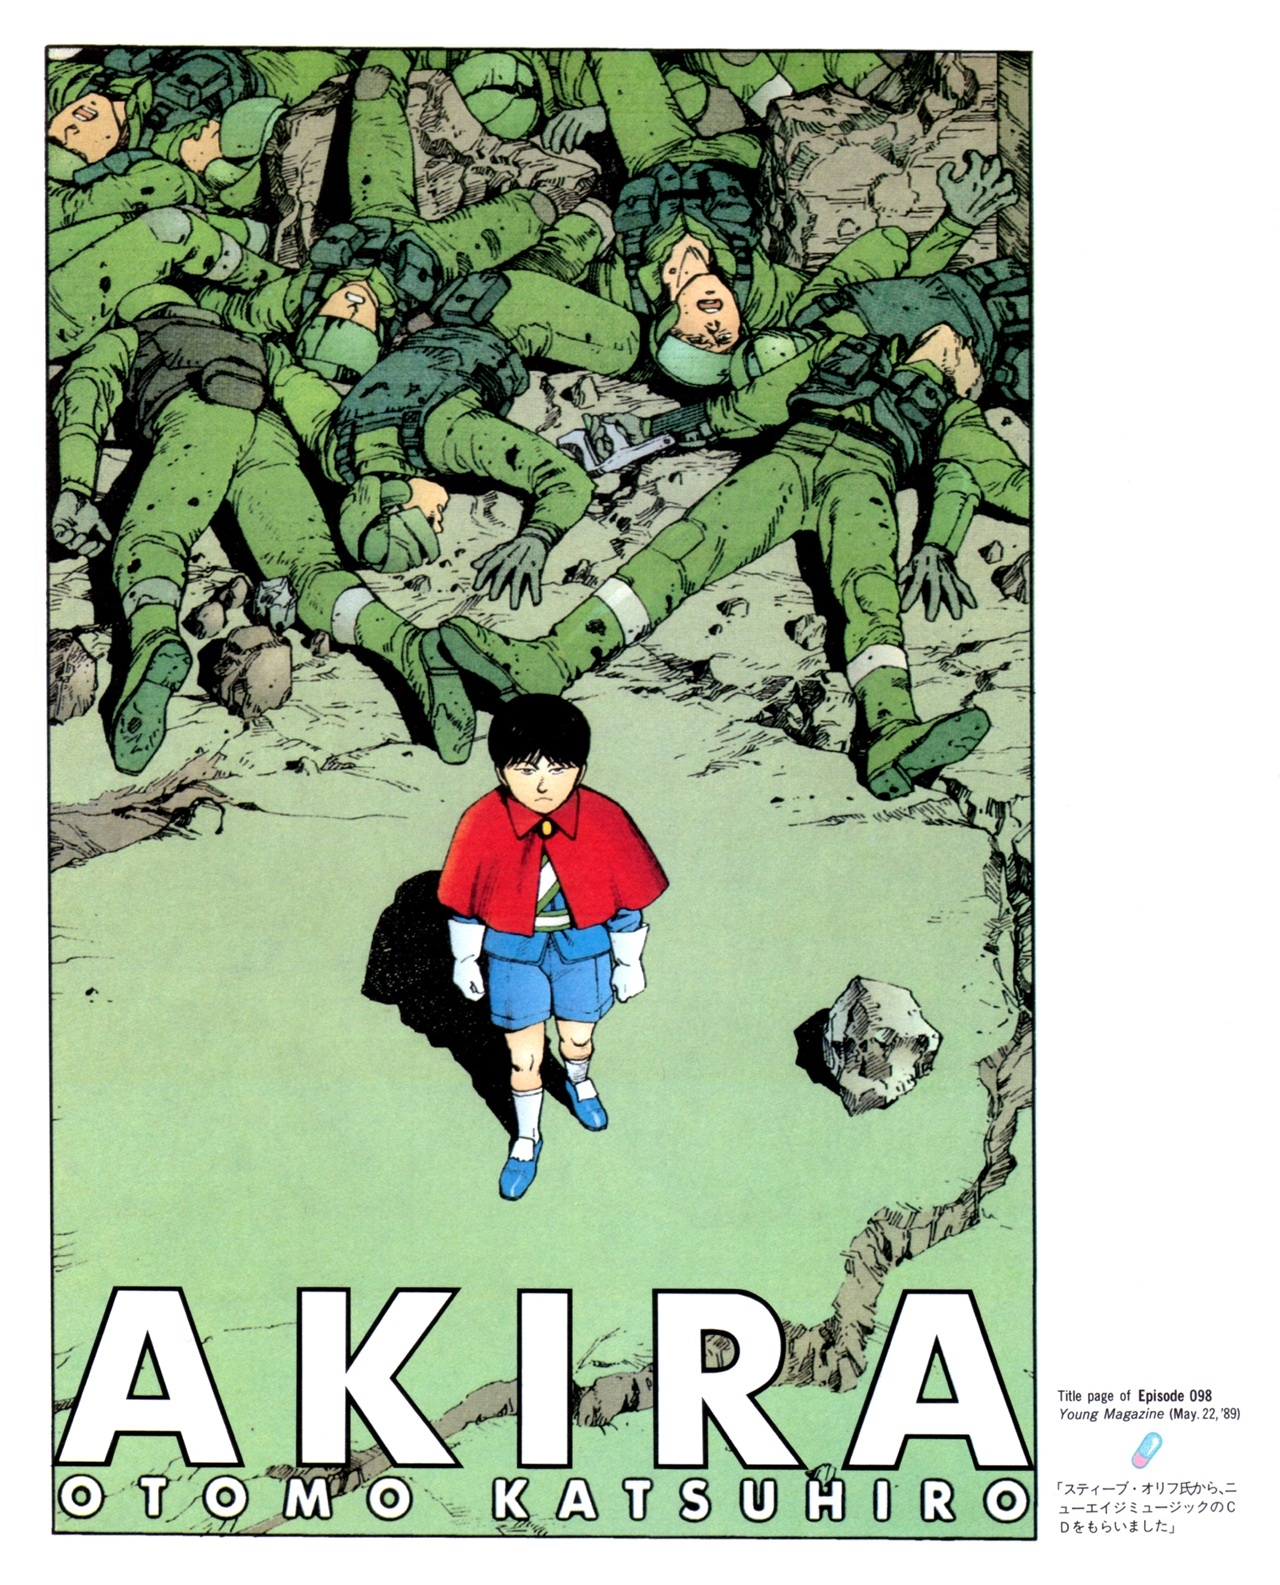 Akira club - The memory of Akira lives on in our hearts! 164